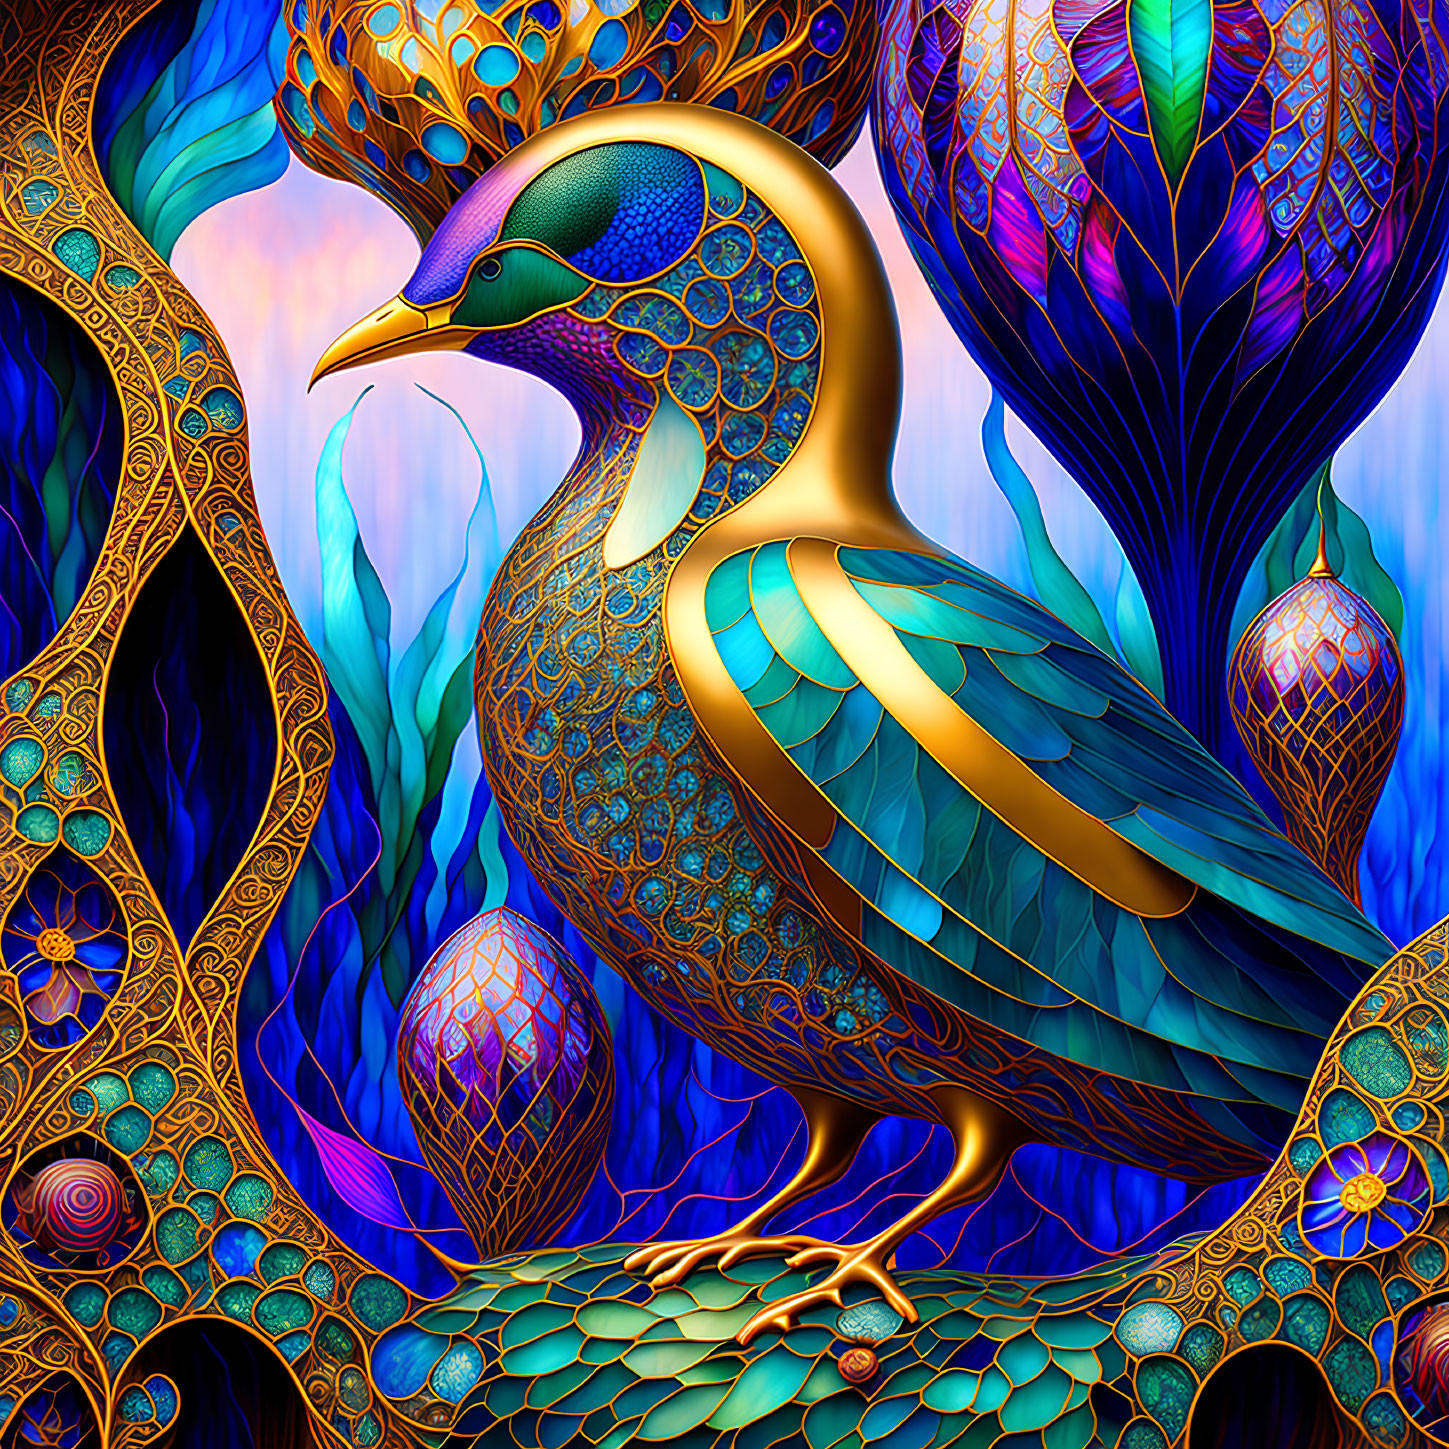 Colorful Peacock Illustration with Intricate Patterns and Ornate Flora